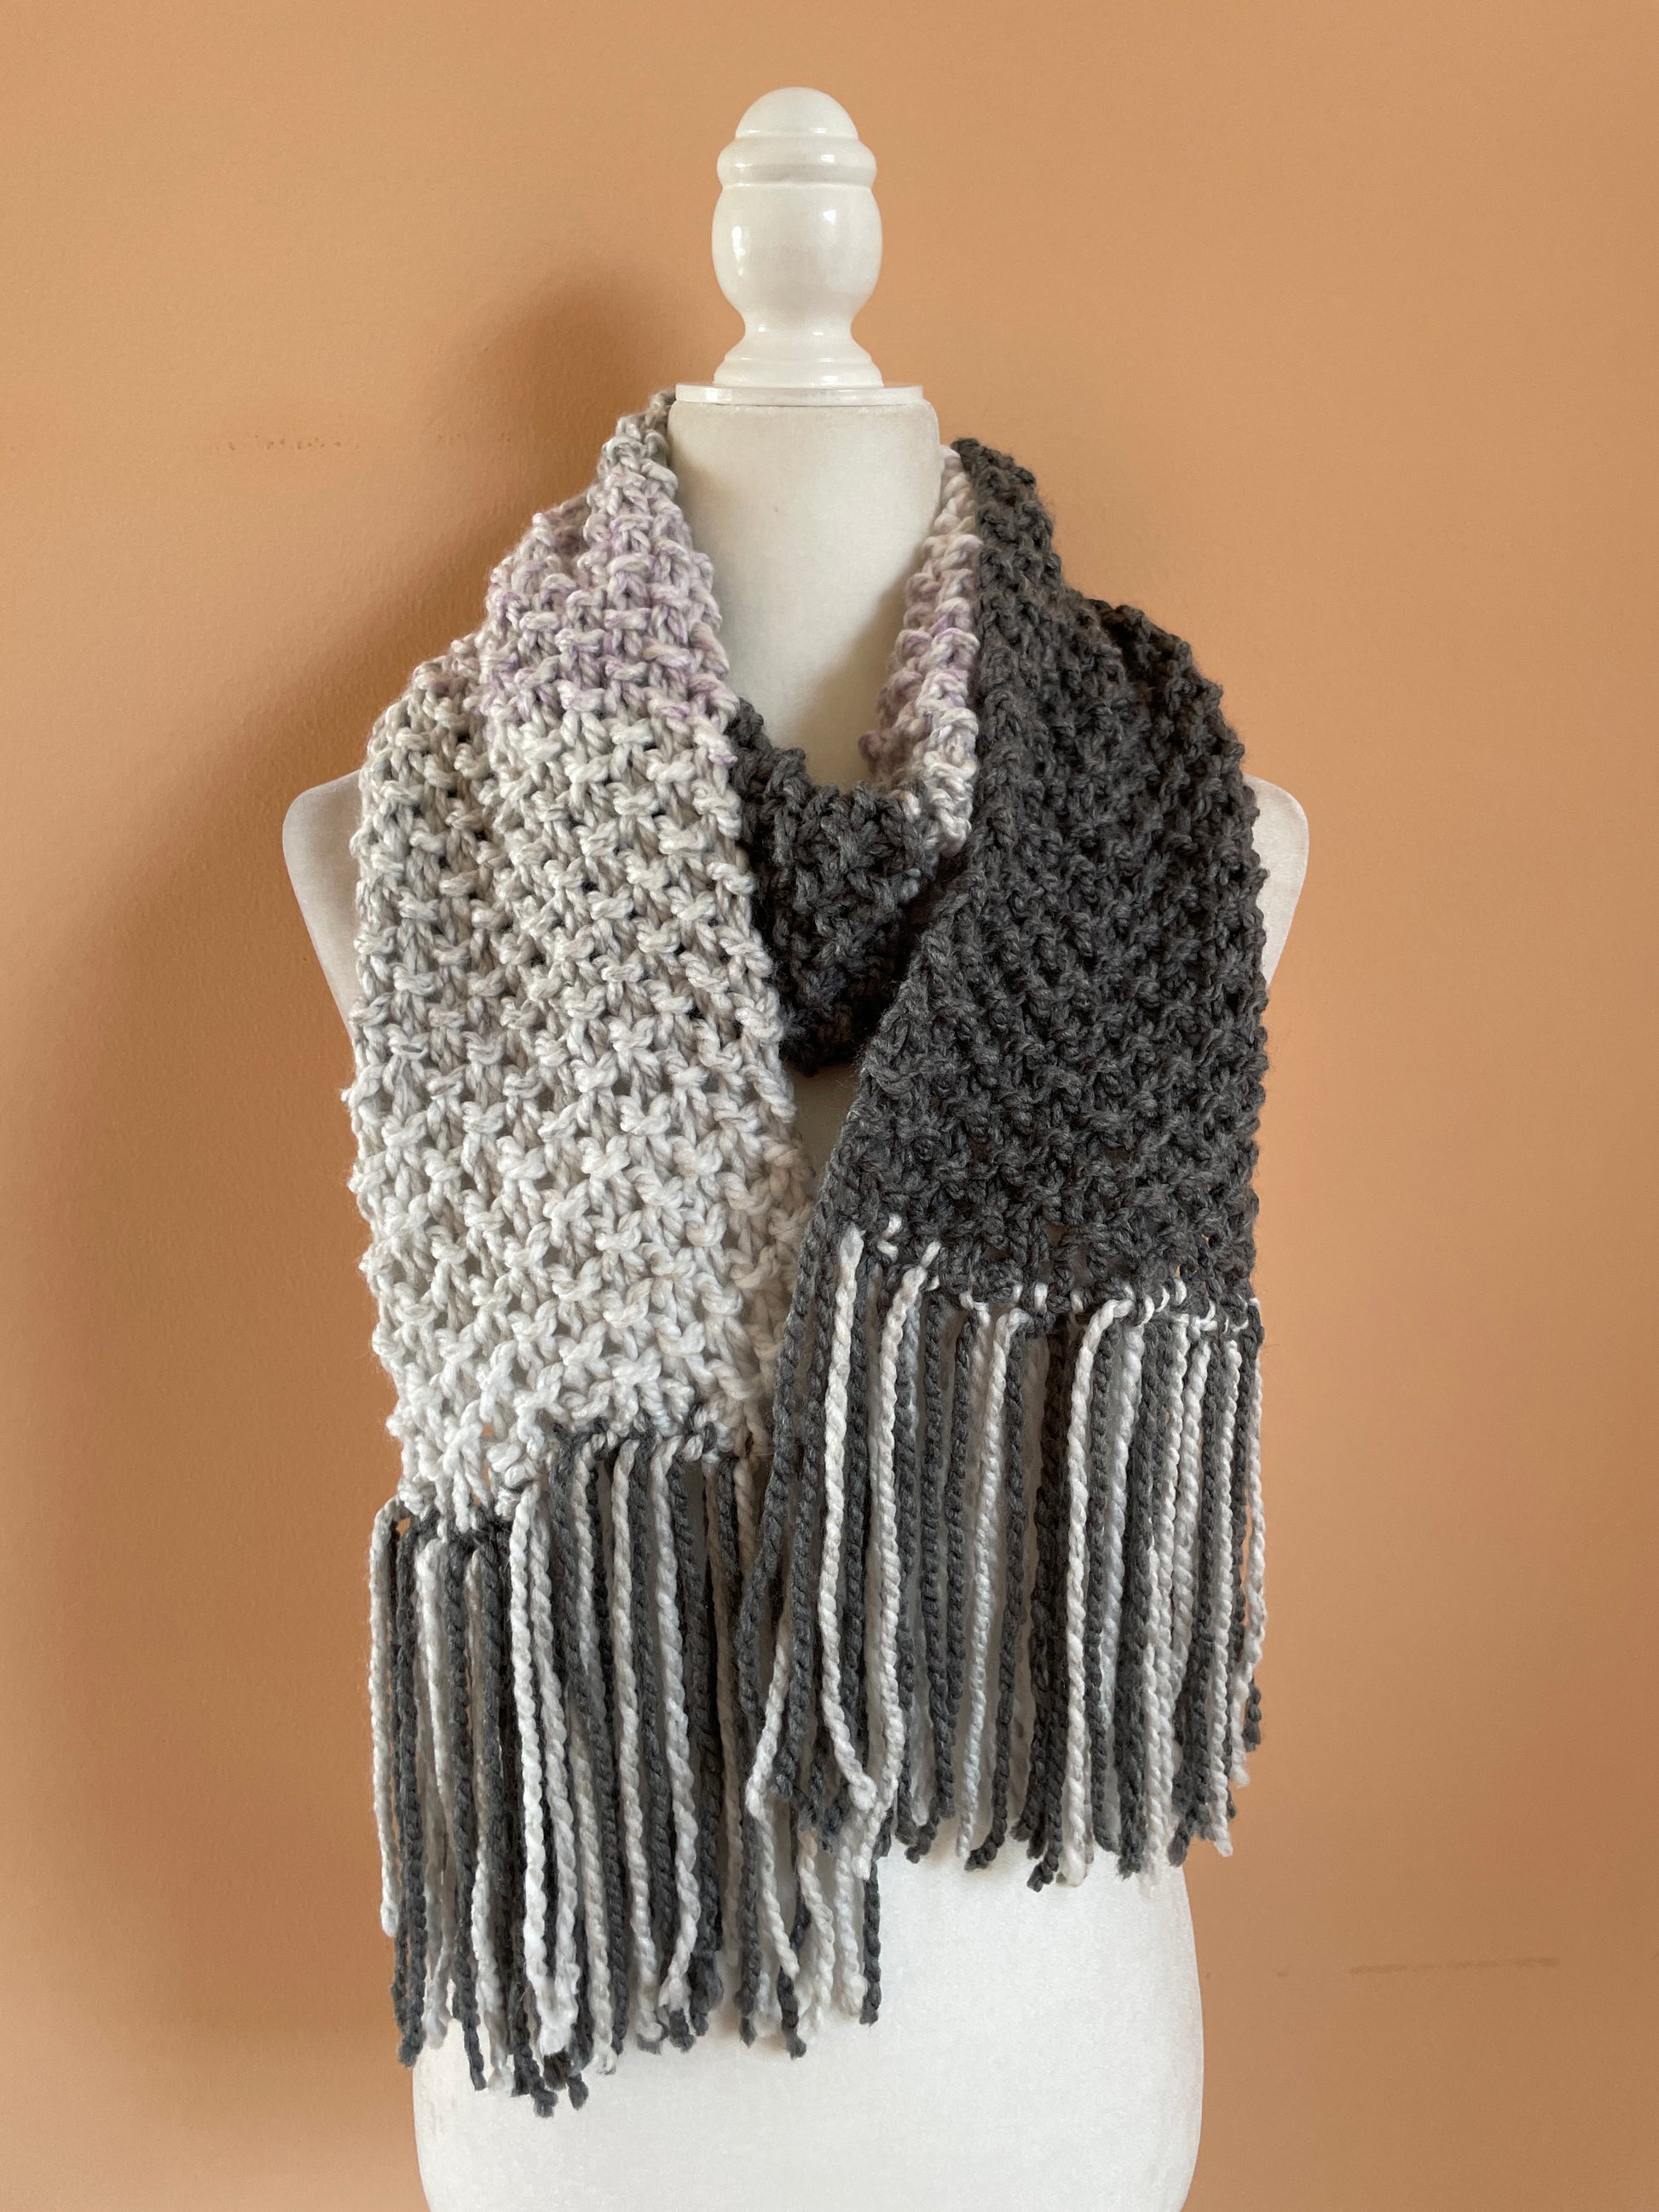 Hand knit winter scarf 2000s Warm me Up Hand Knit Fringed Gray Winter Scarf